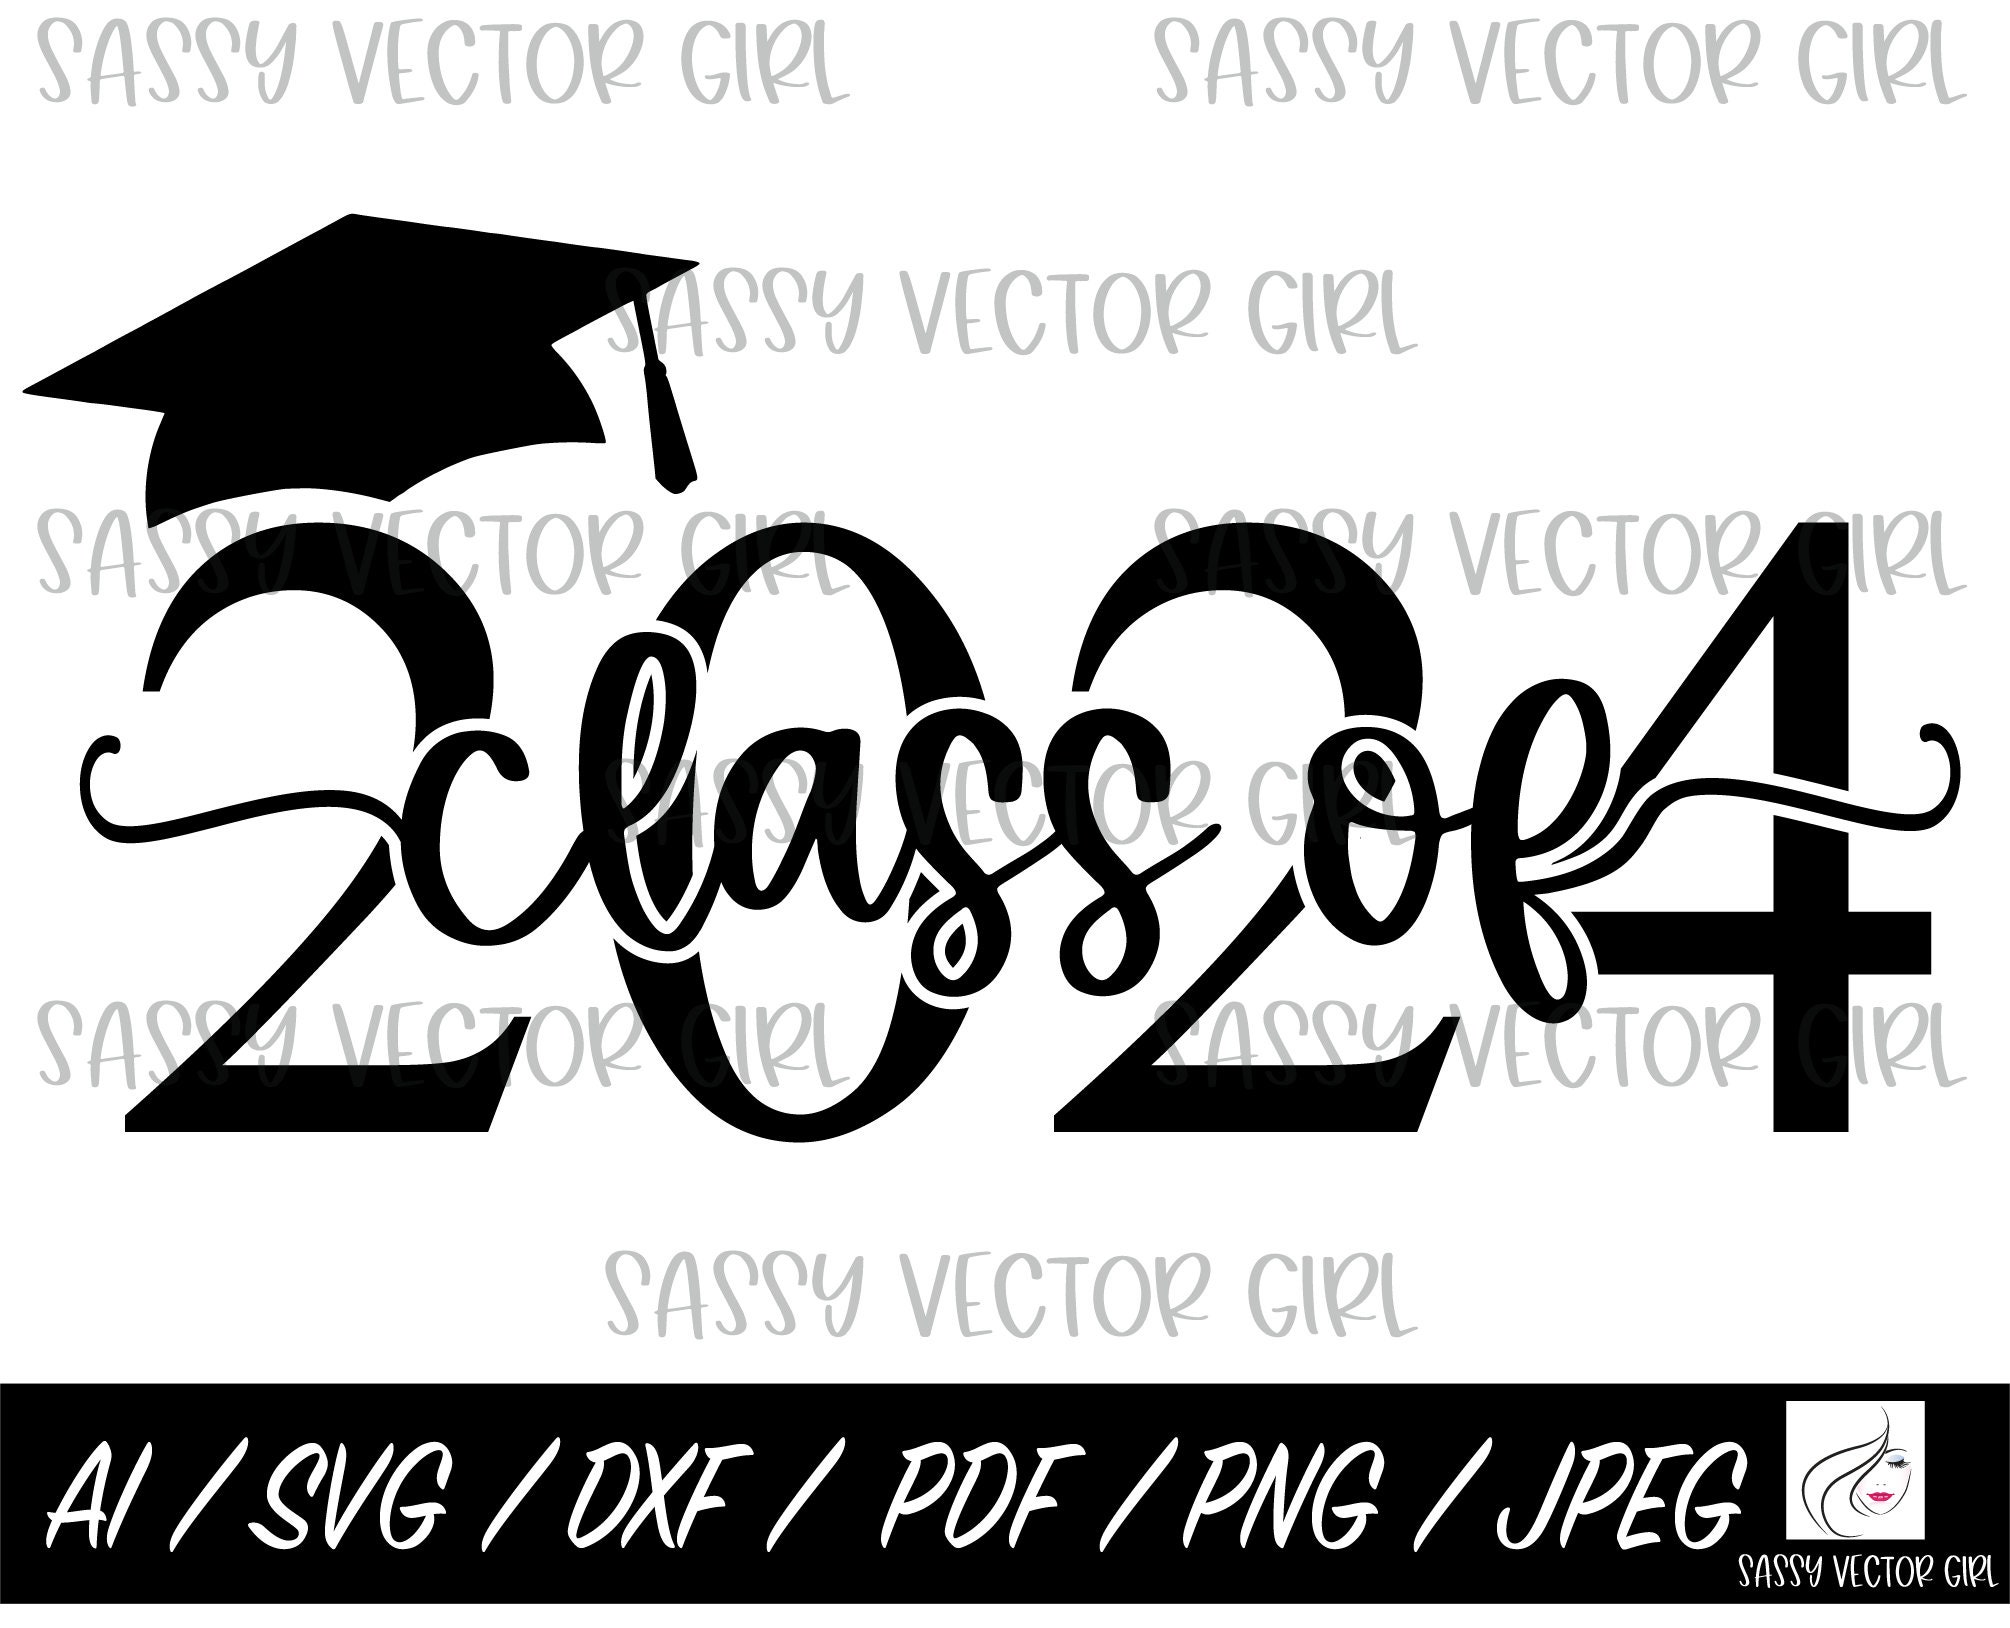 Class Of 2024 SVG with Graduation Hat